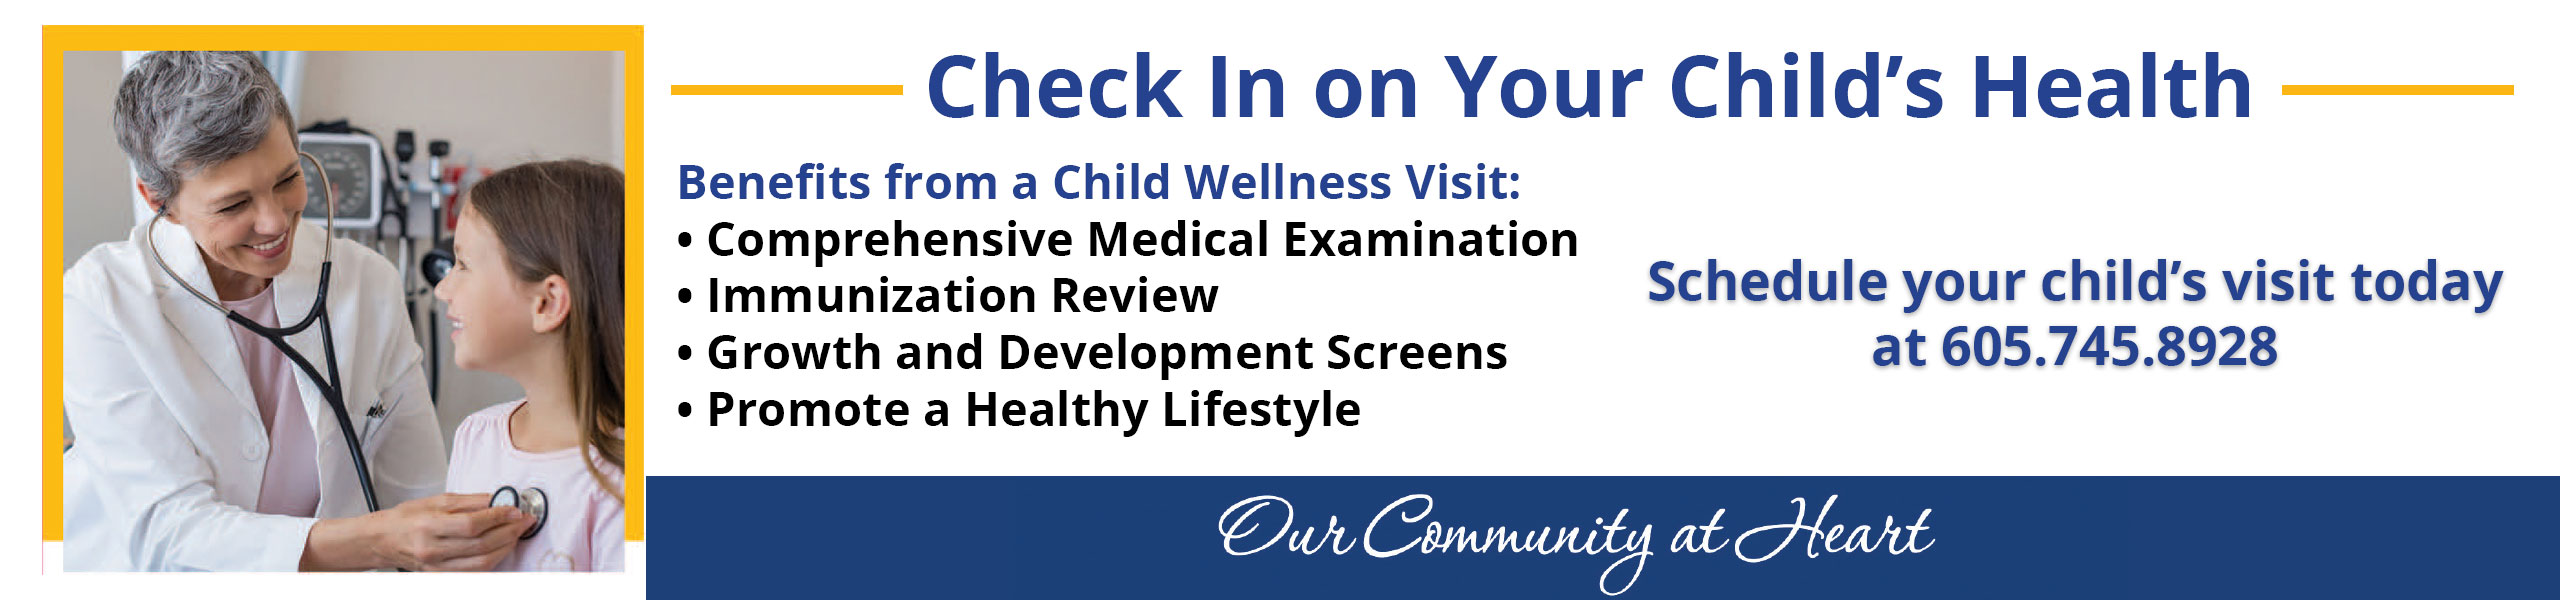 Check In on Your Child's Health

Benefits from a child Wellness Visit:

*Comprehensive Medical Examination
*Immunization Review
°Growth and Development Screens
*Promote a Healthy Lifestyle

Schedule your child's visit today at
605.745.8928

Our Community at Heart